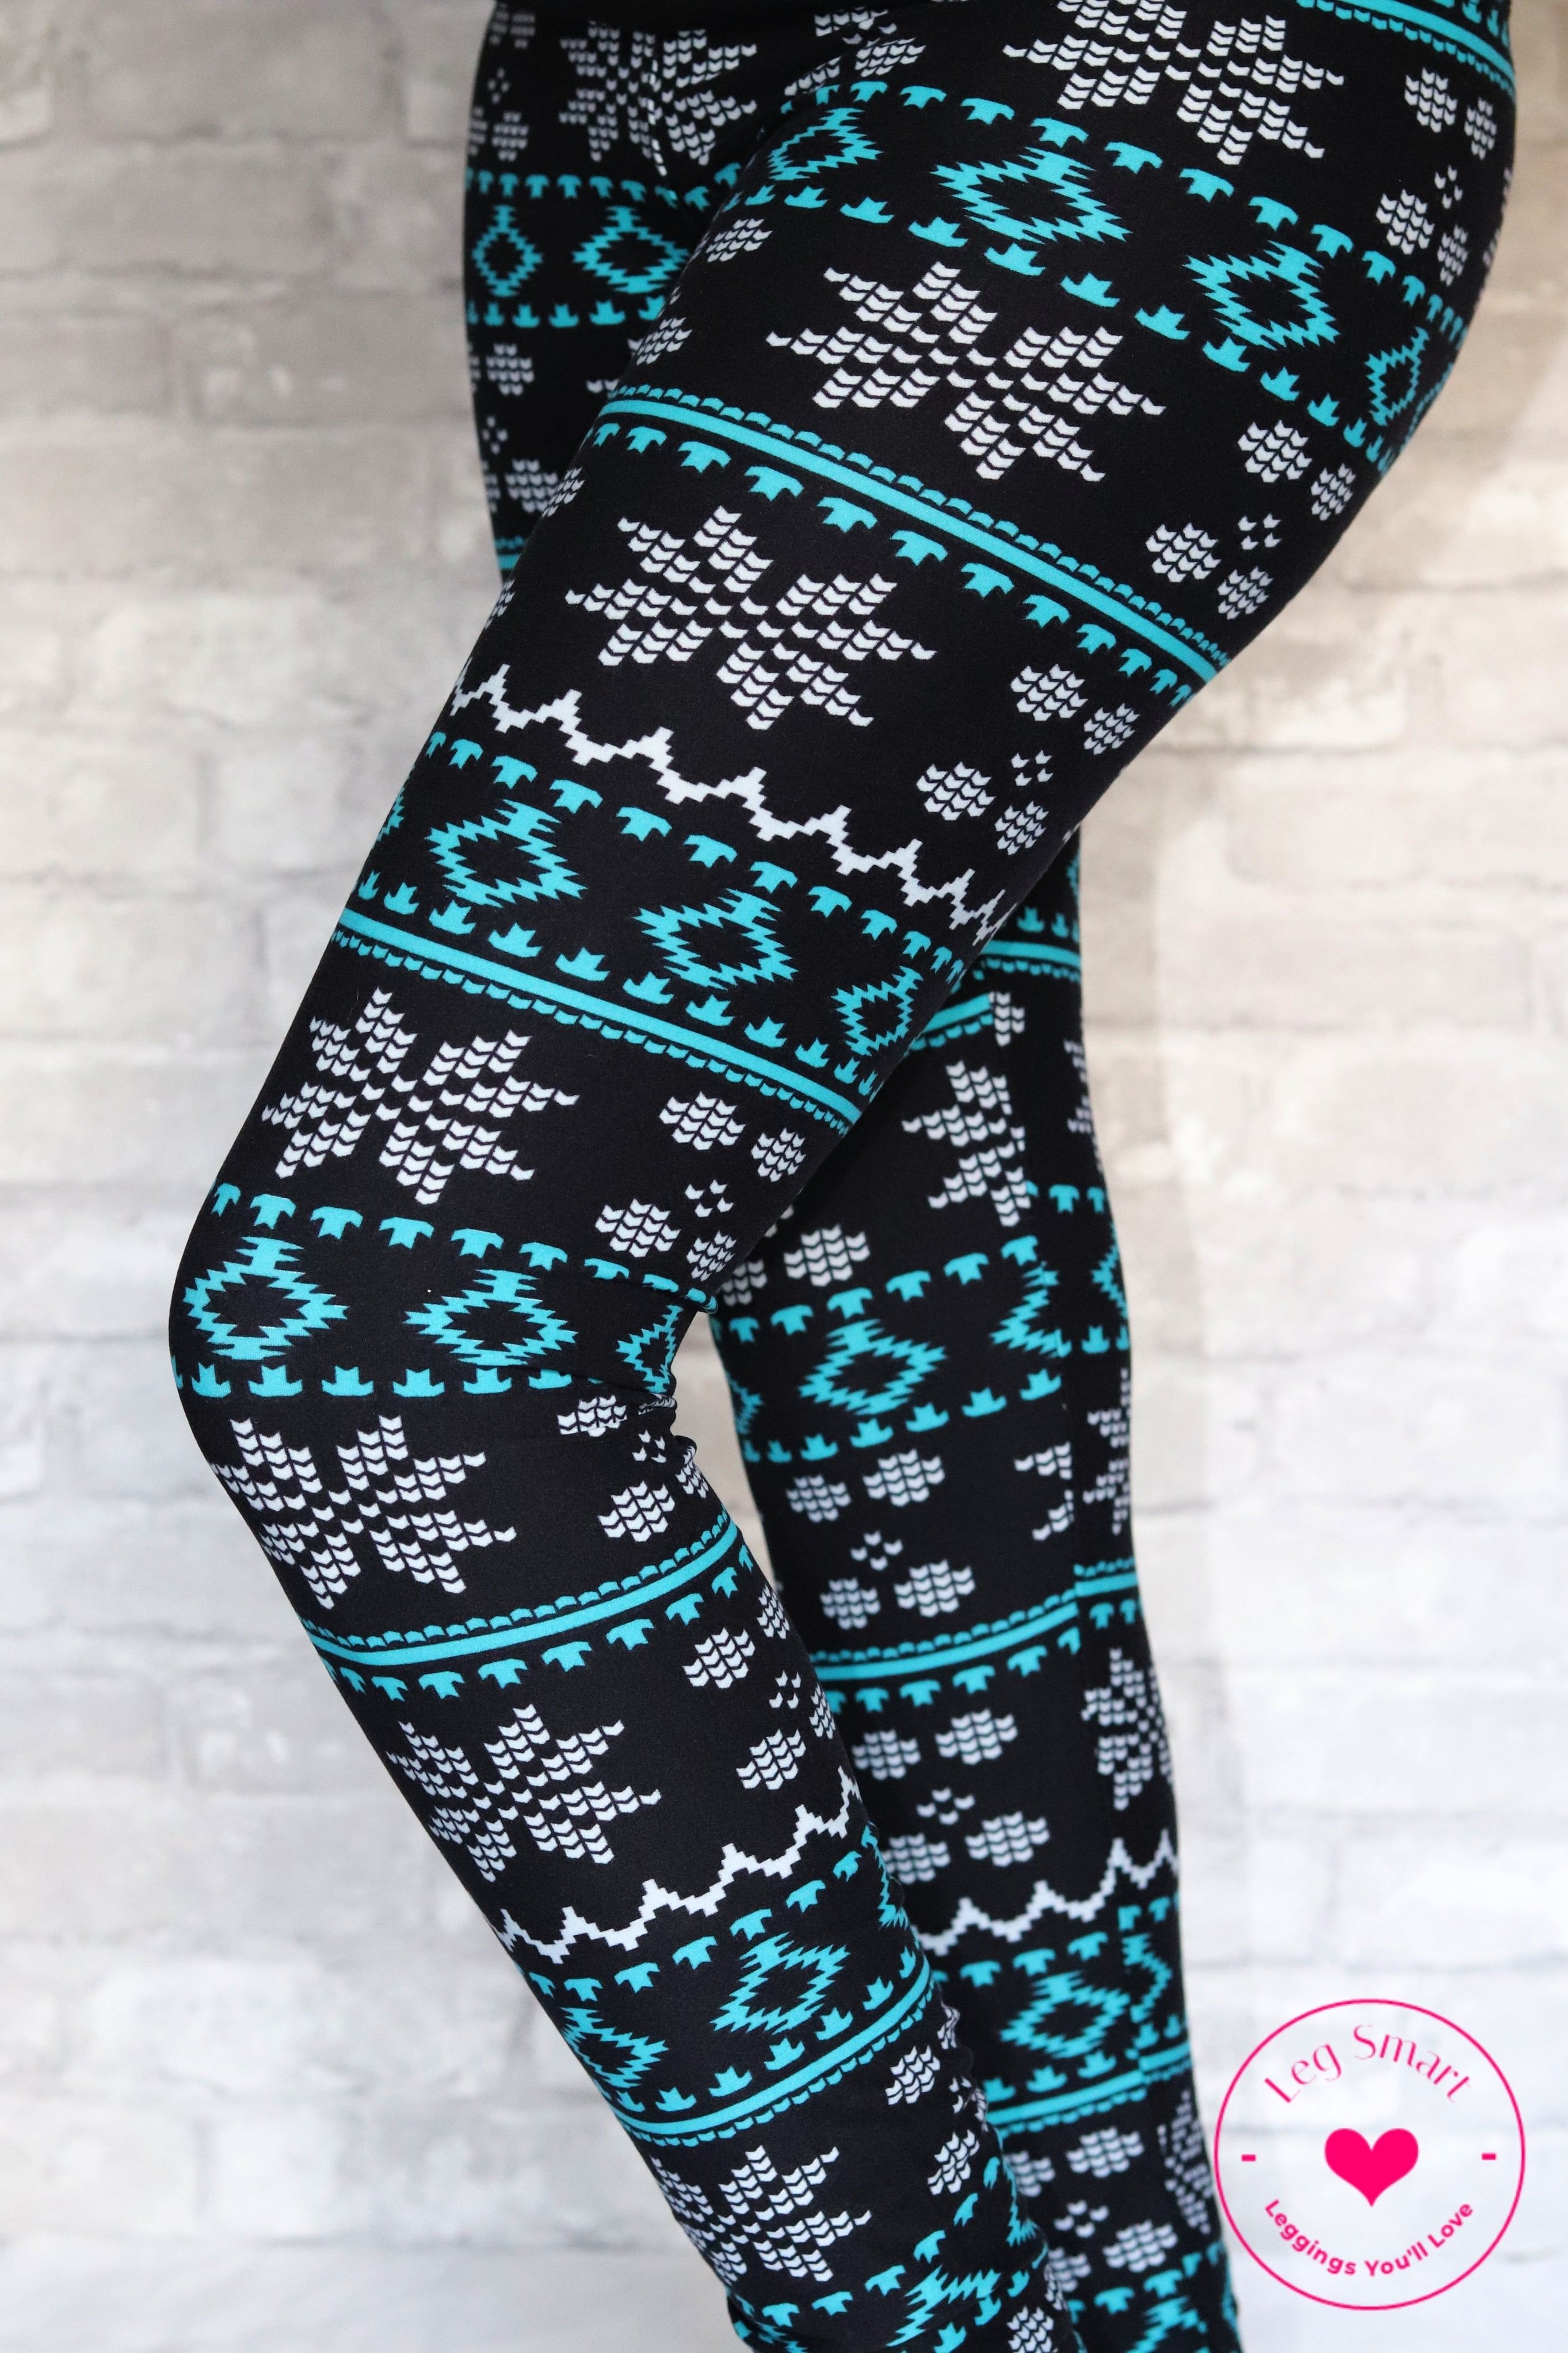 Snowflakes Blue Yoga Leggings Women Christmas Workout Pants Cosplay  Matching Group Costume Capris Activewear Outfit Running Party 